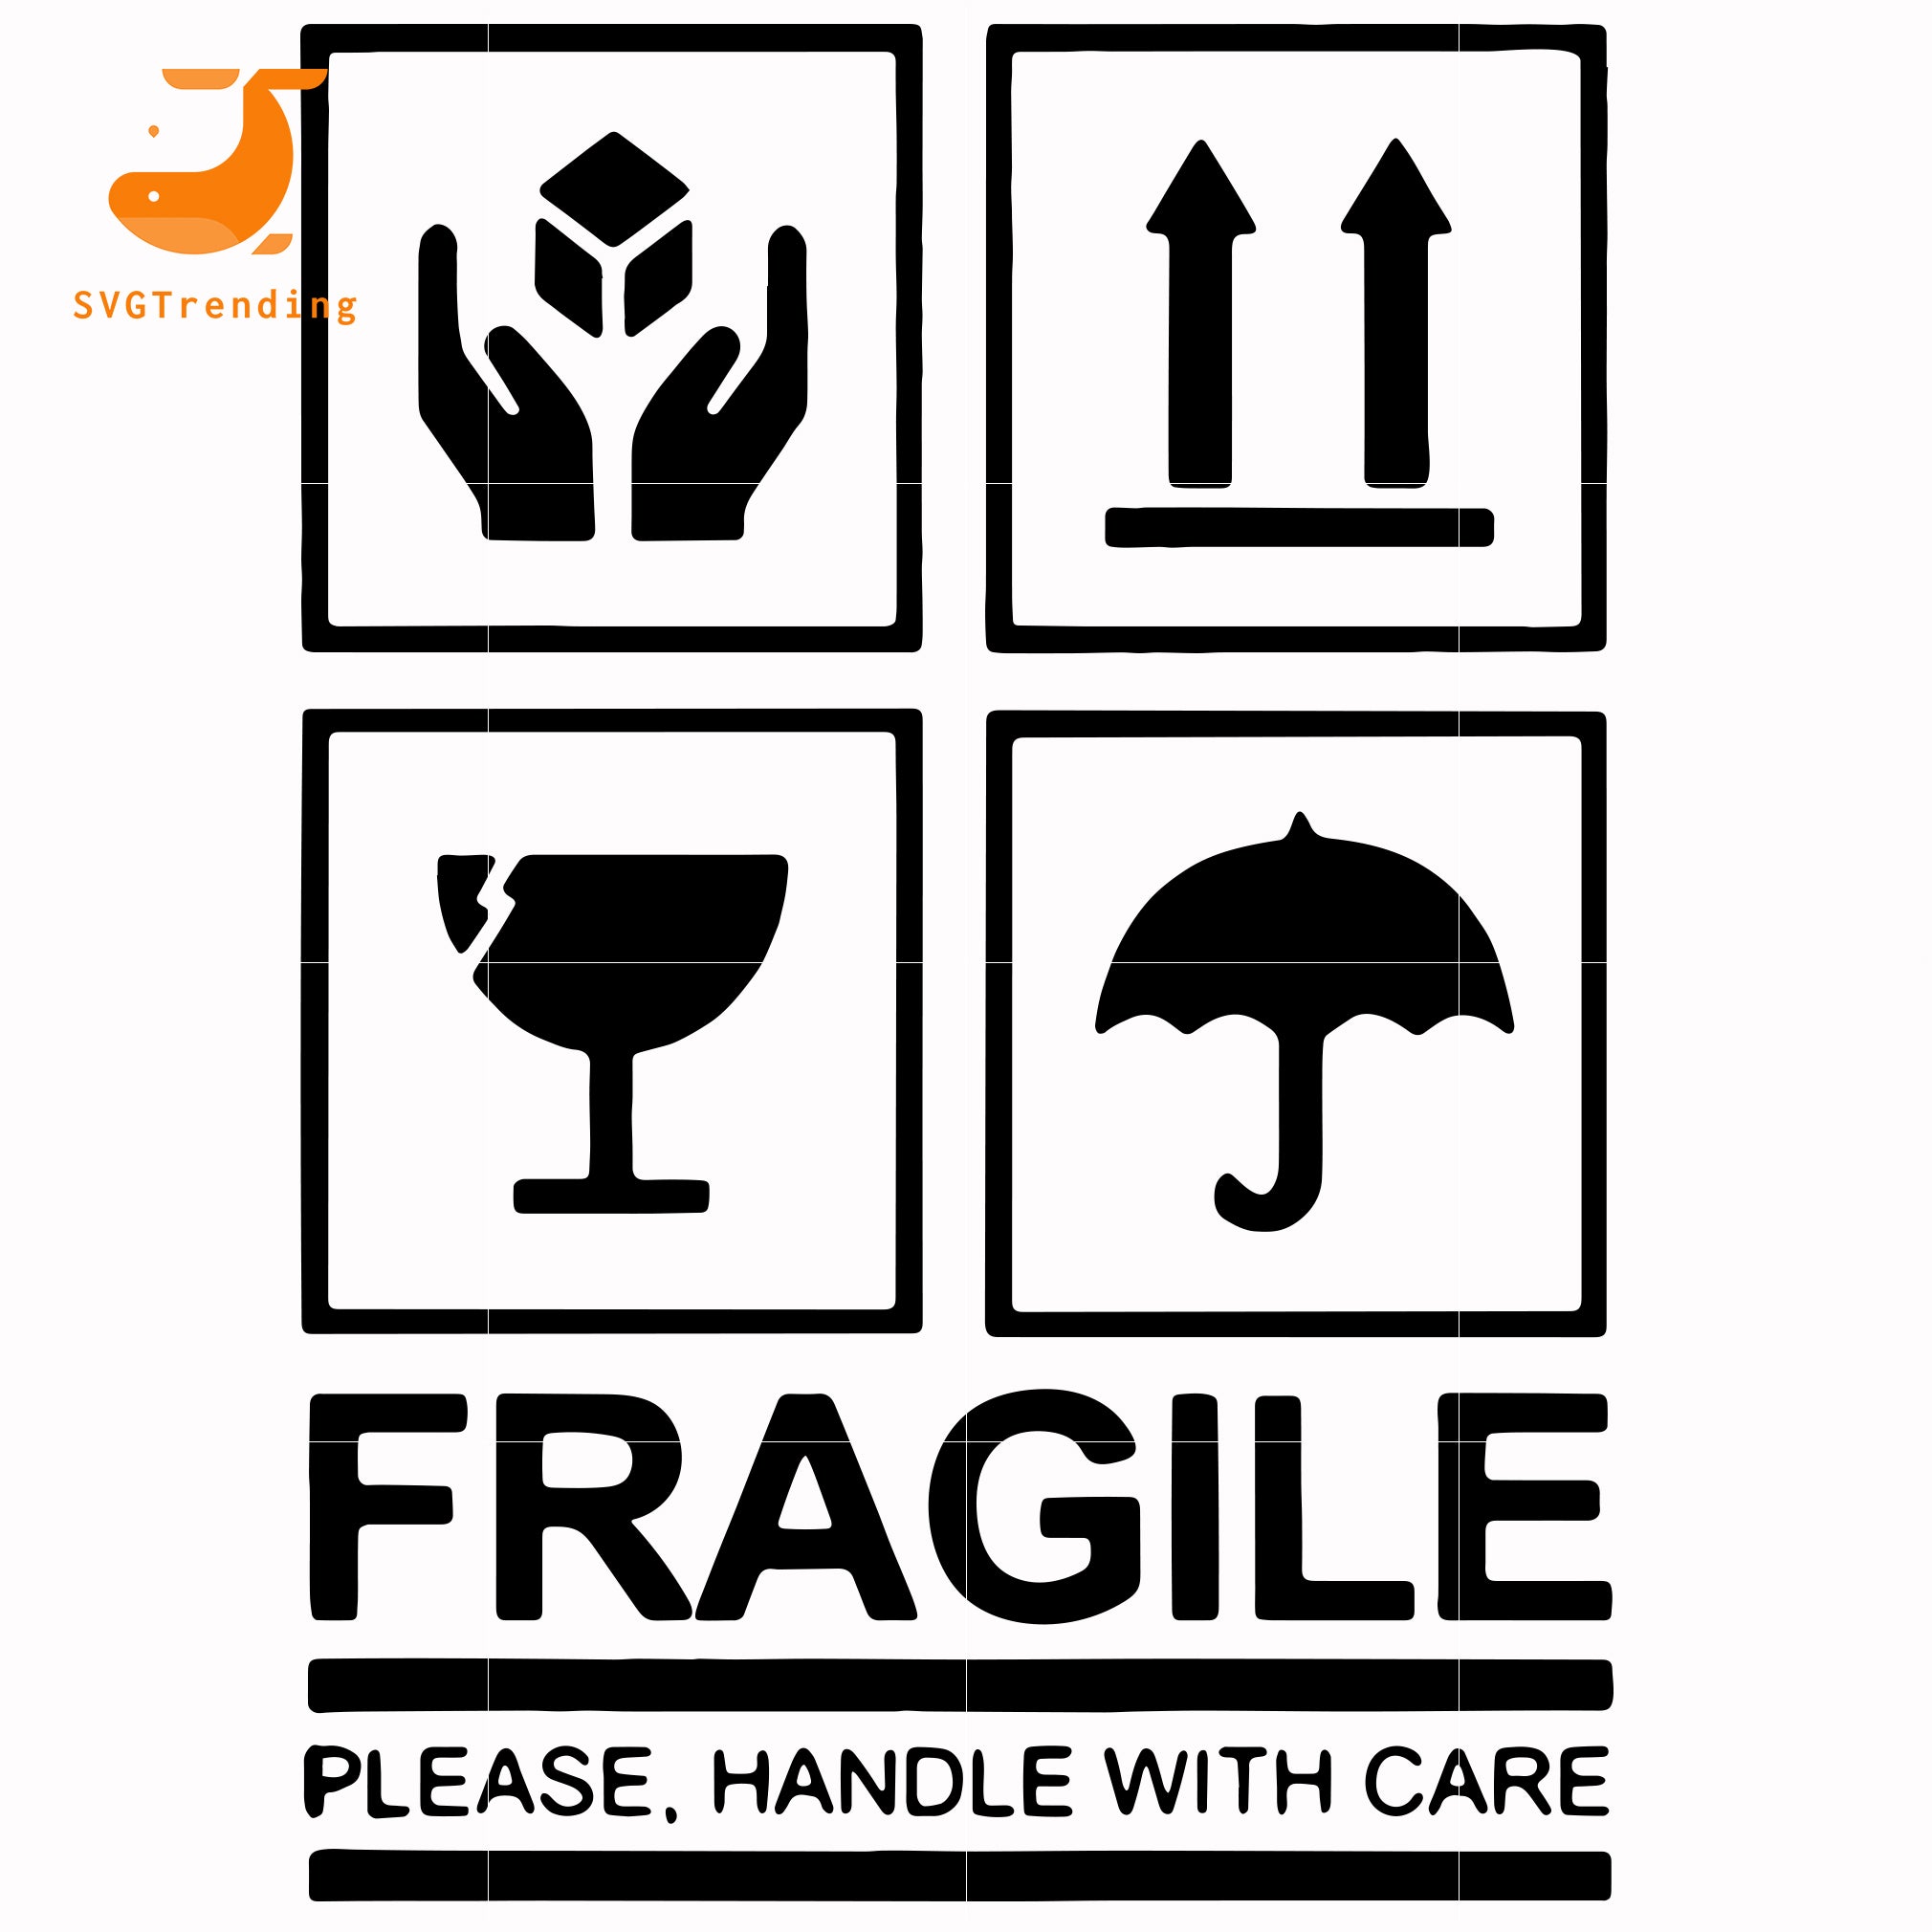 Fragile Handle With Care Svg Png Pdf Eps Handle With Care Fragile Sign Svg Drawing Illustration Art Collectibles Brainchild Net